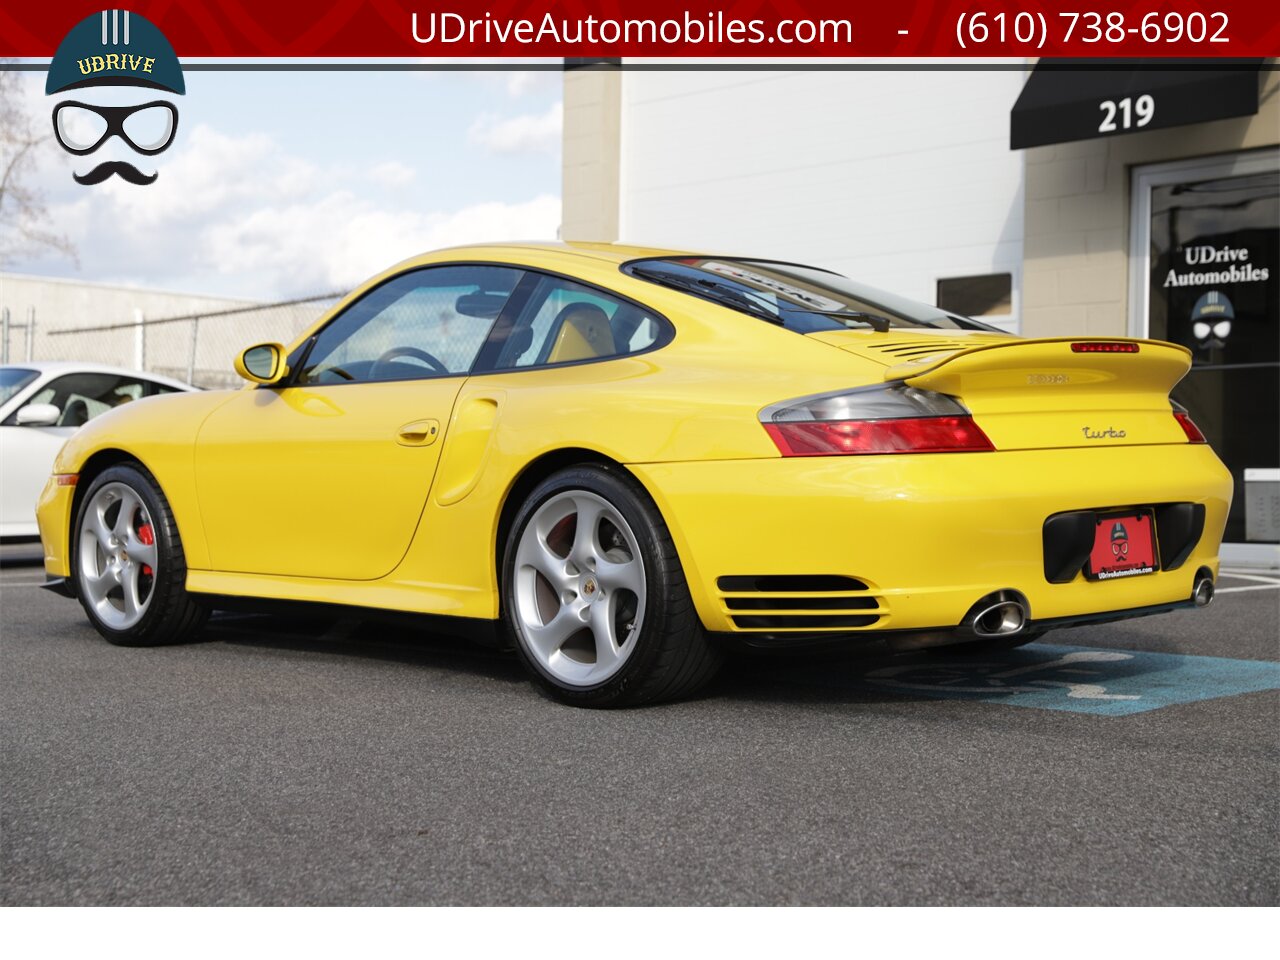 2001 Porsche 911 Turbo 996 6 Sp PTS Ferrari Giallo Modena  FULL Carbon Pkg 1 of a Kind Paint to Sample - Photo 18 - West Chester, PA 19382